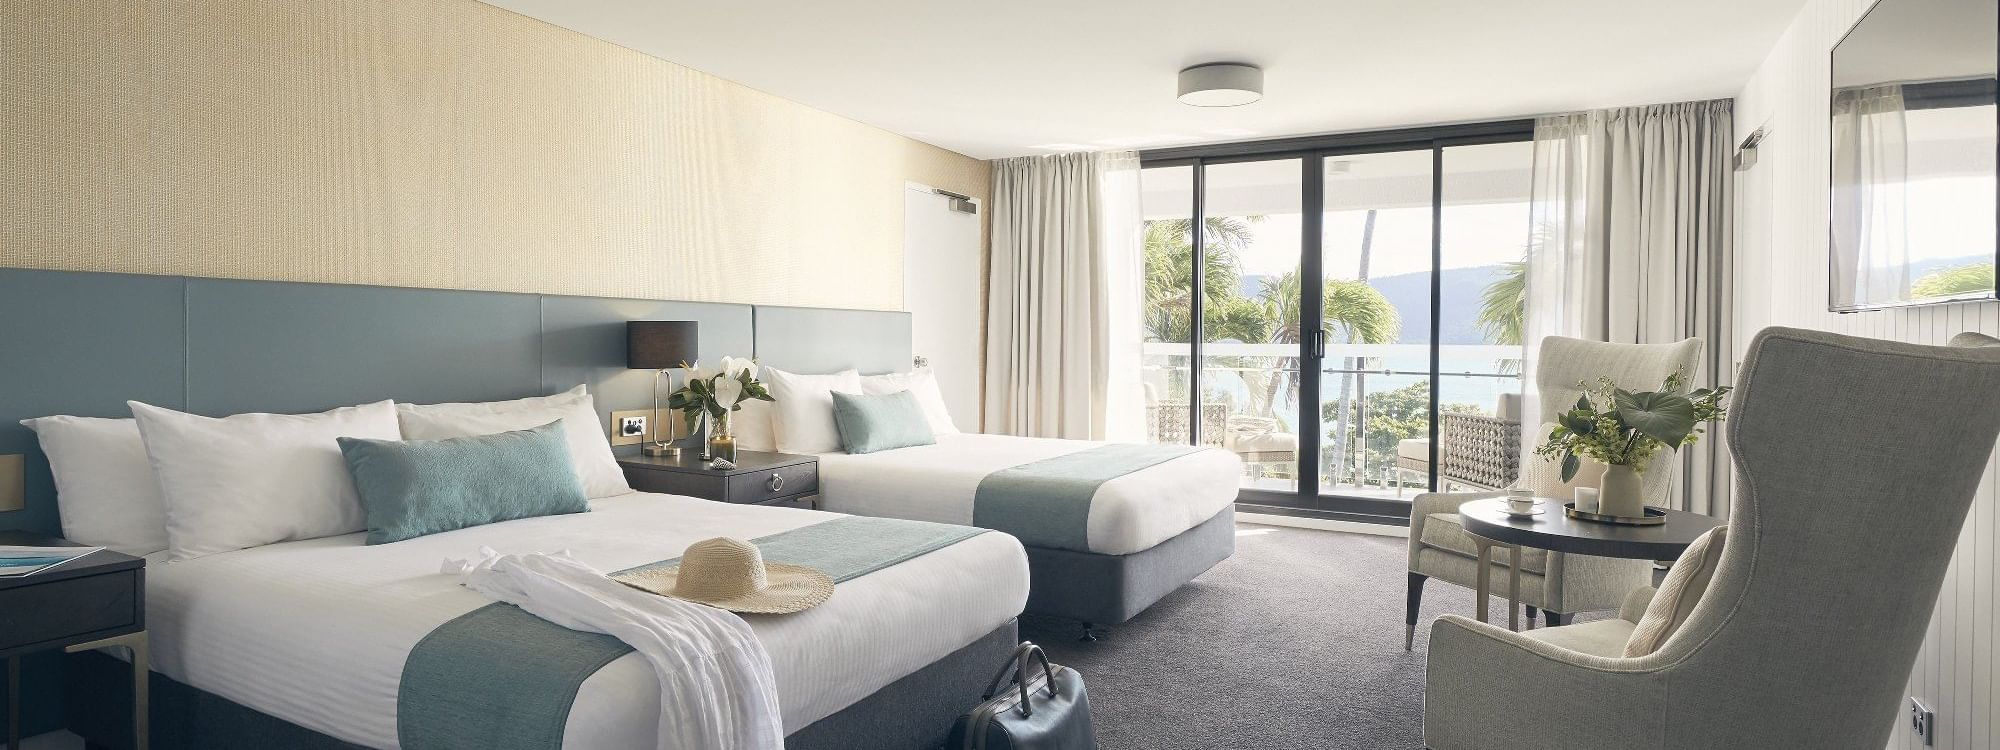 Two beds in Deluxe Serenity Twin room at Daydream Island Resort